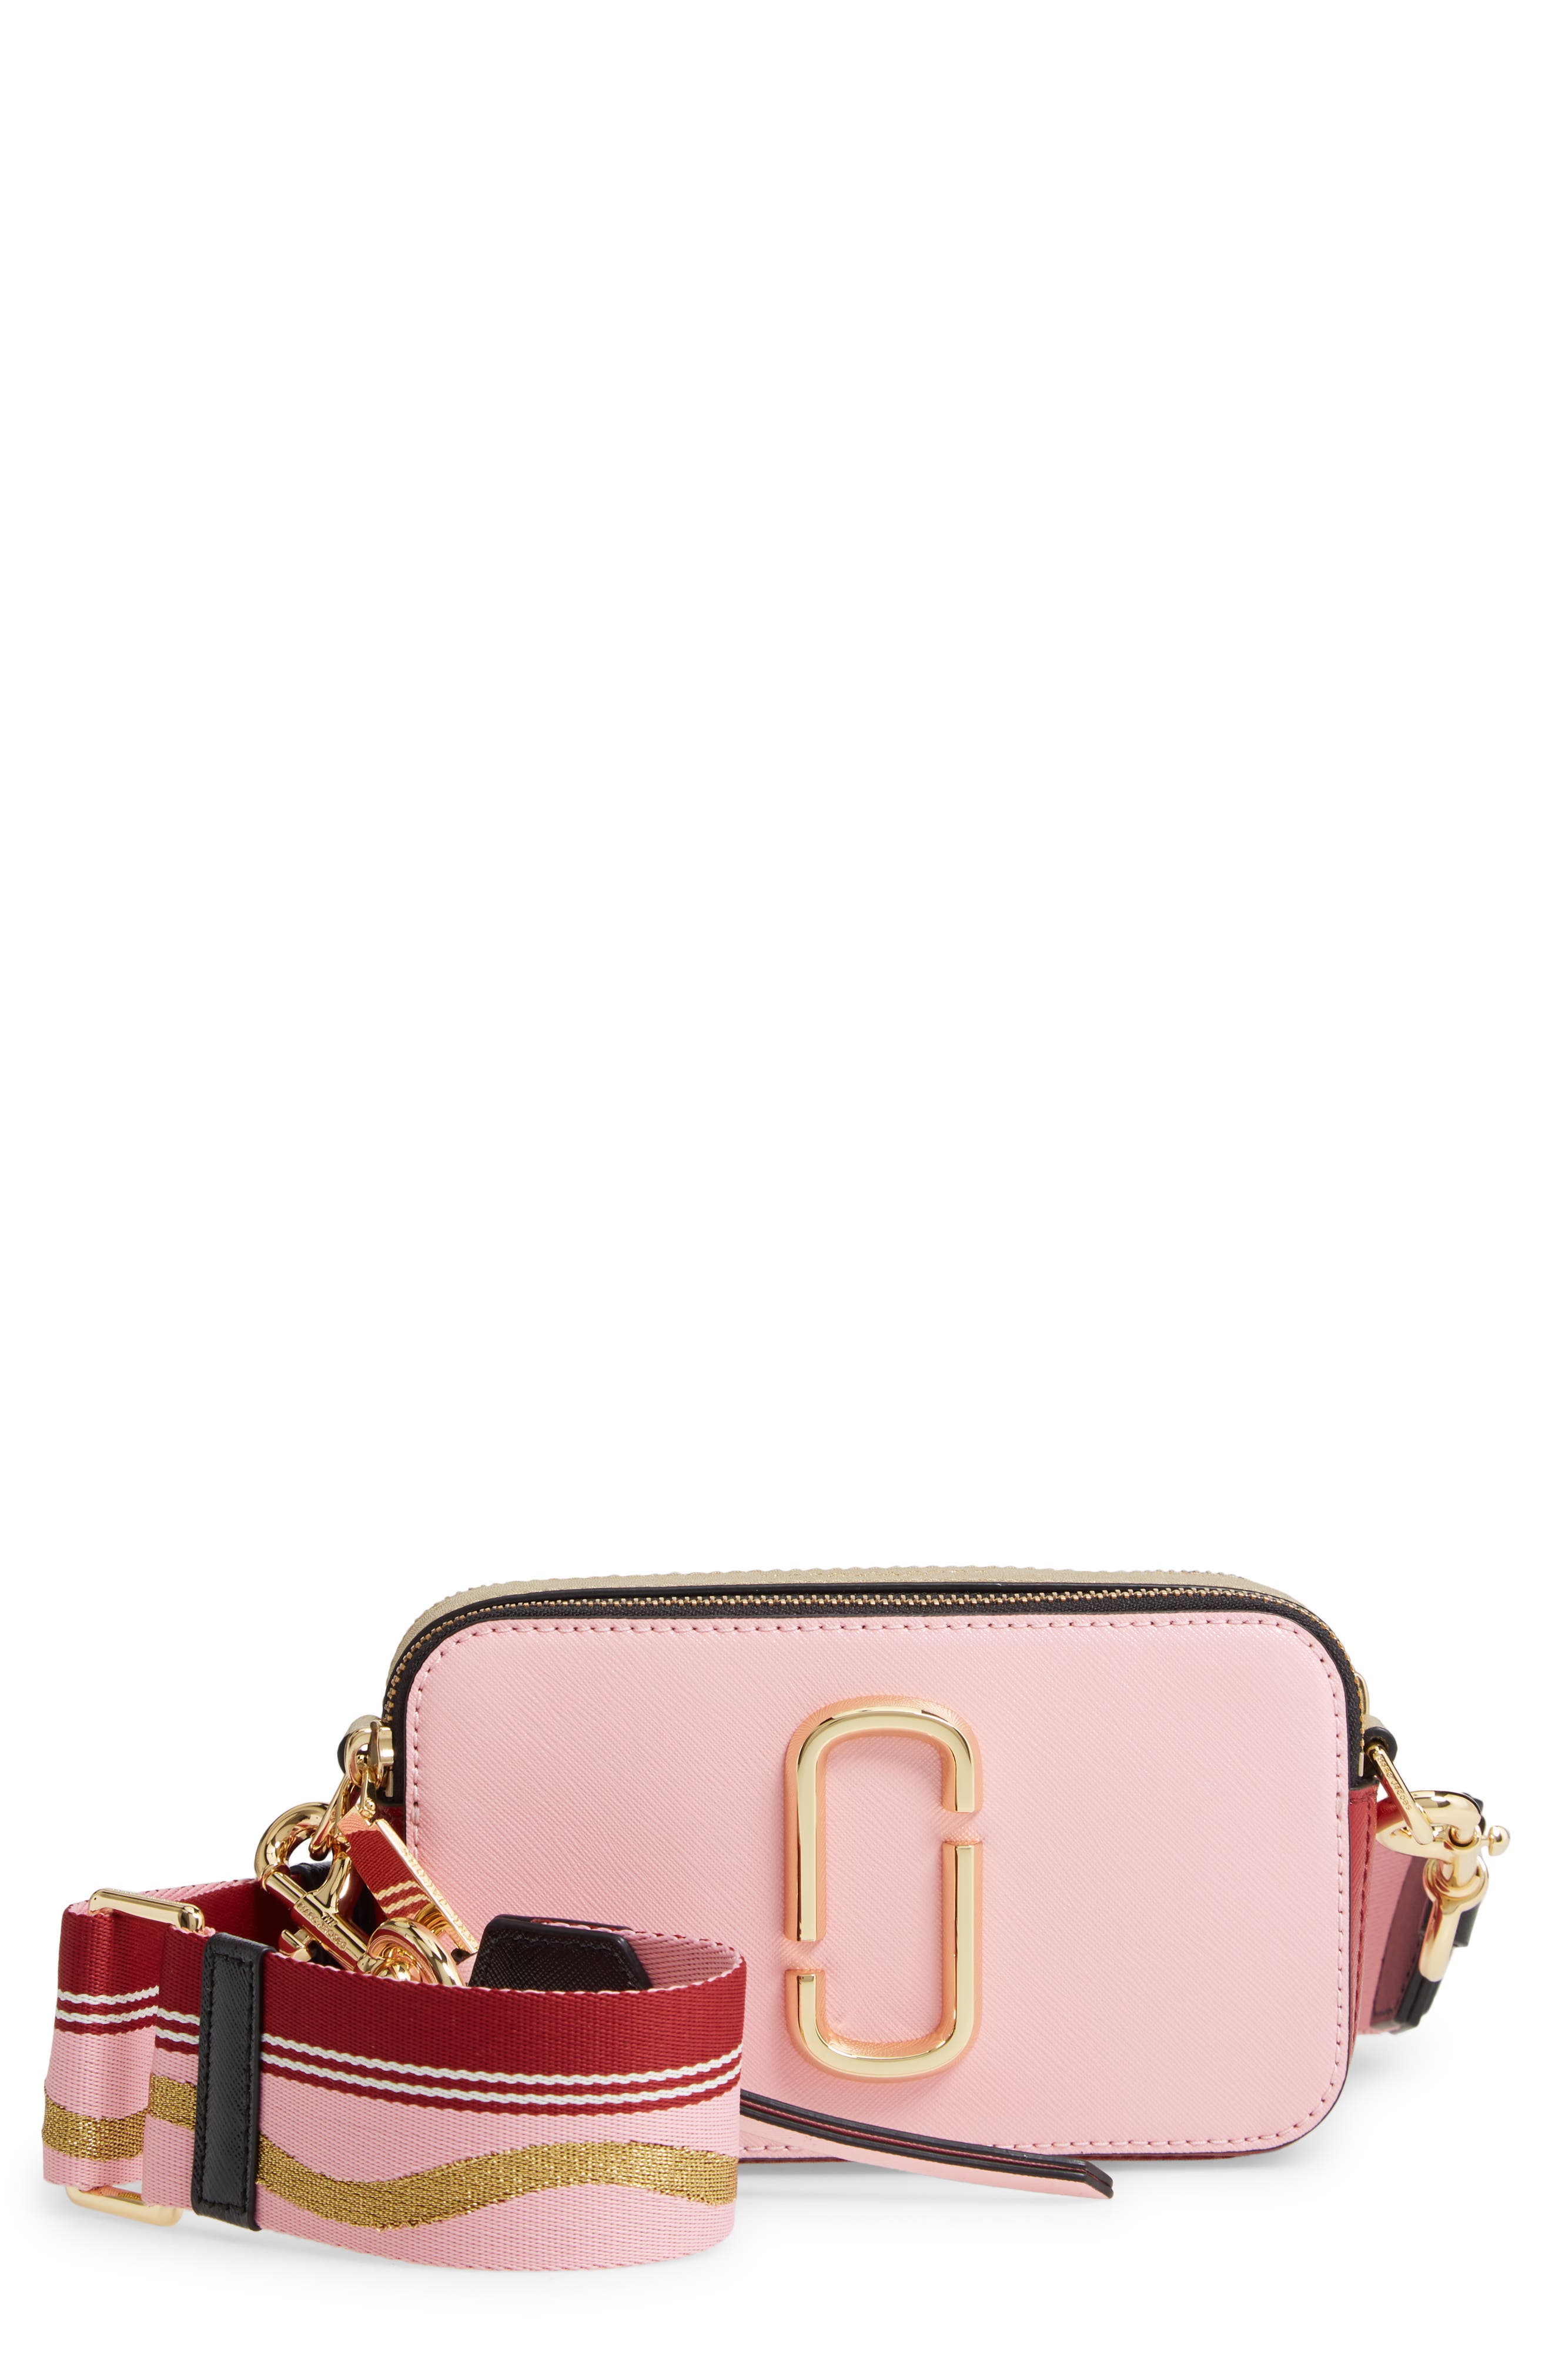 Marc Jacobs The Snapshot Leather Crossbody Bag in New Baby Pink/Red